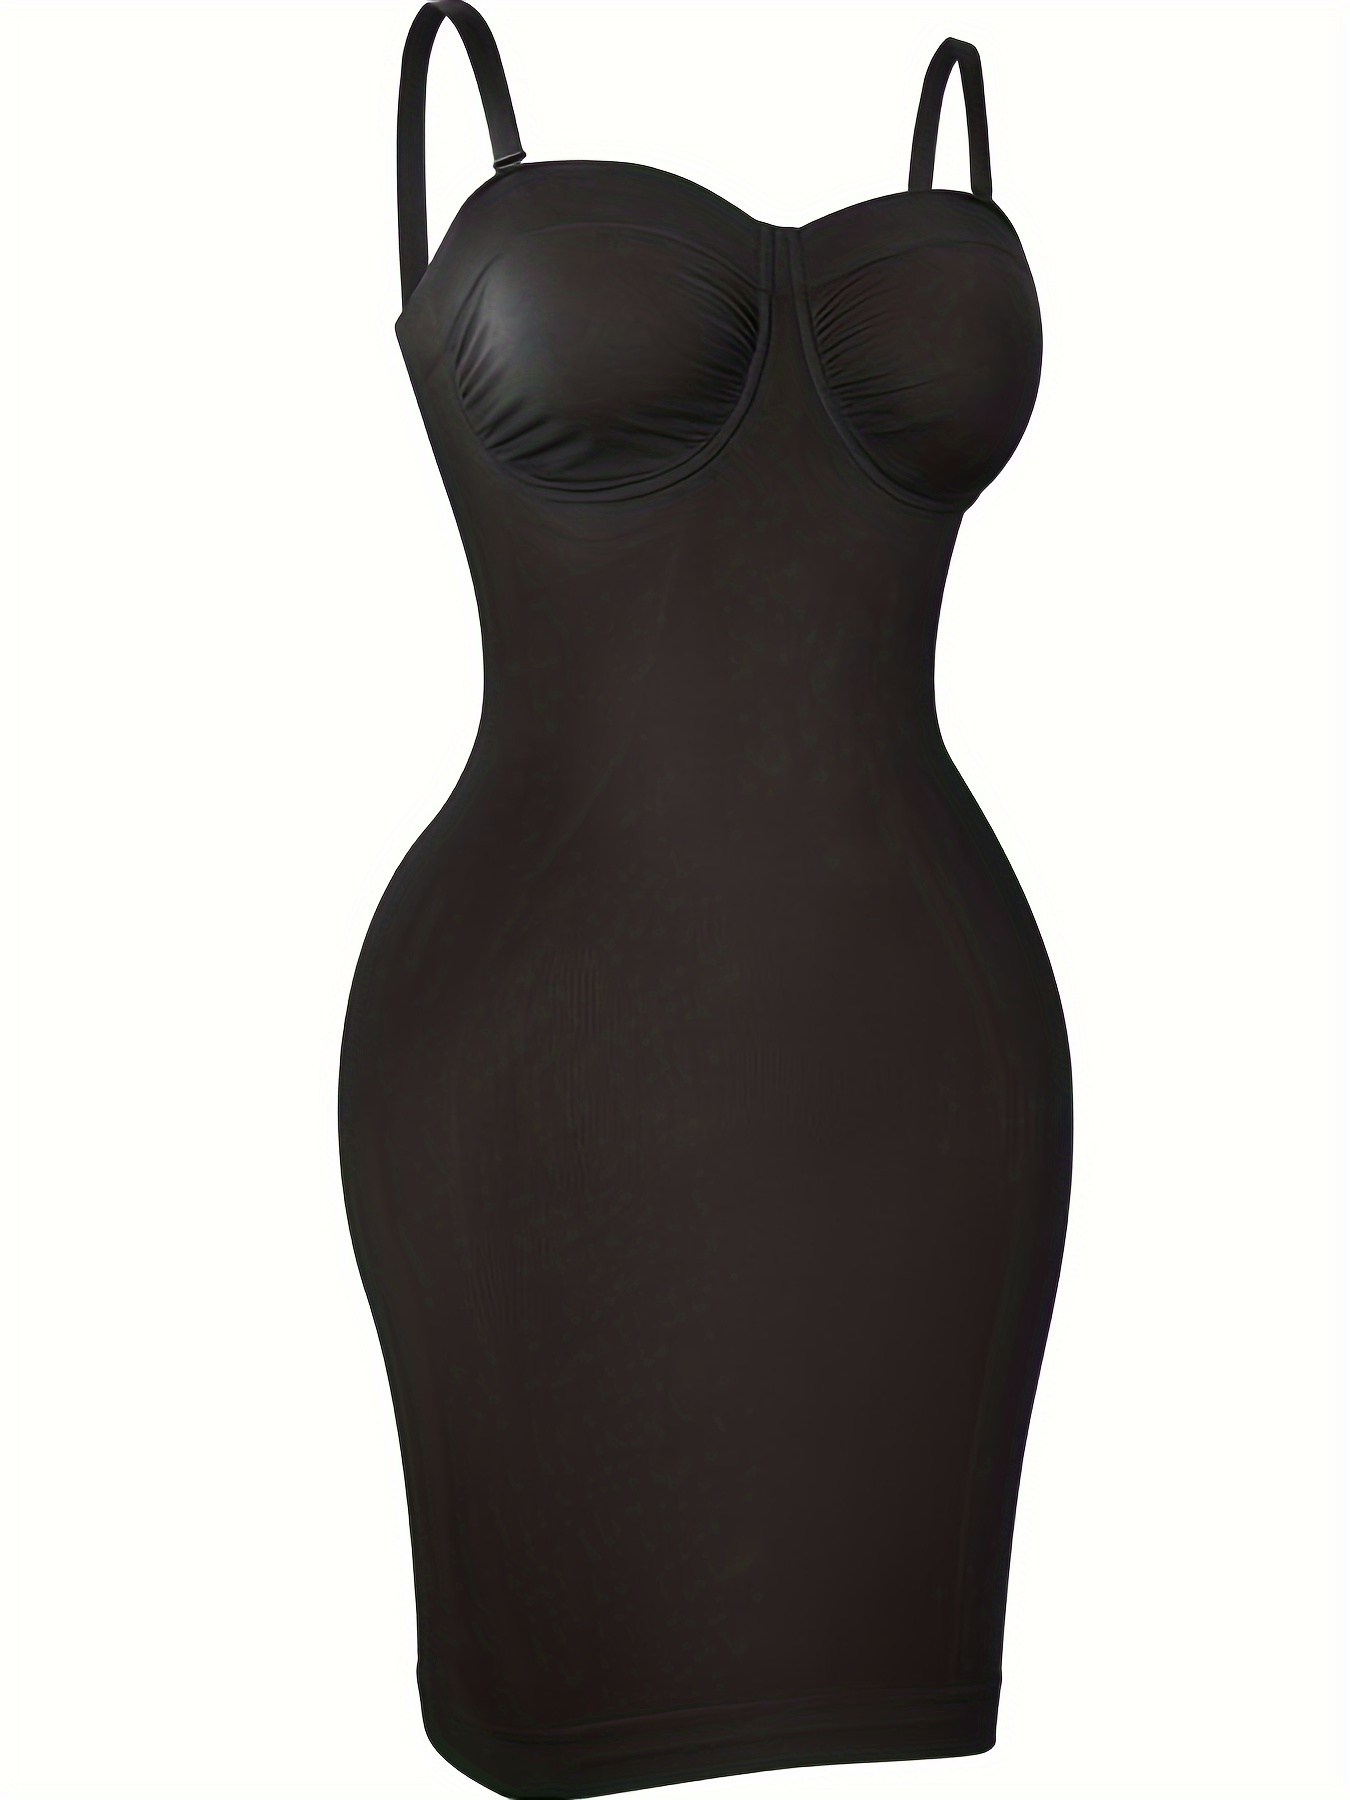 Seamless Strapless Shapewear Full Body Slip with Firm Tummy Control